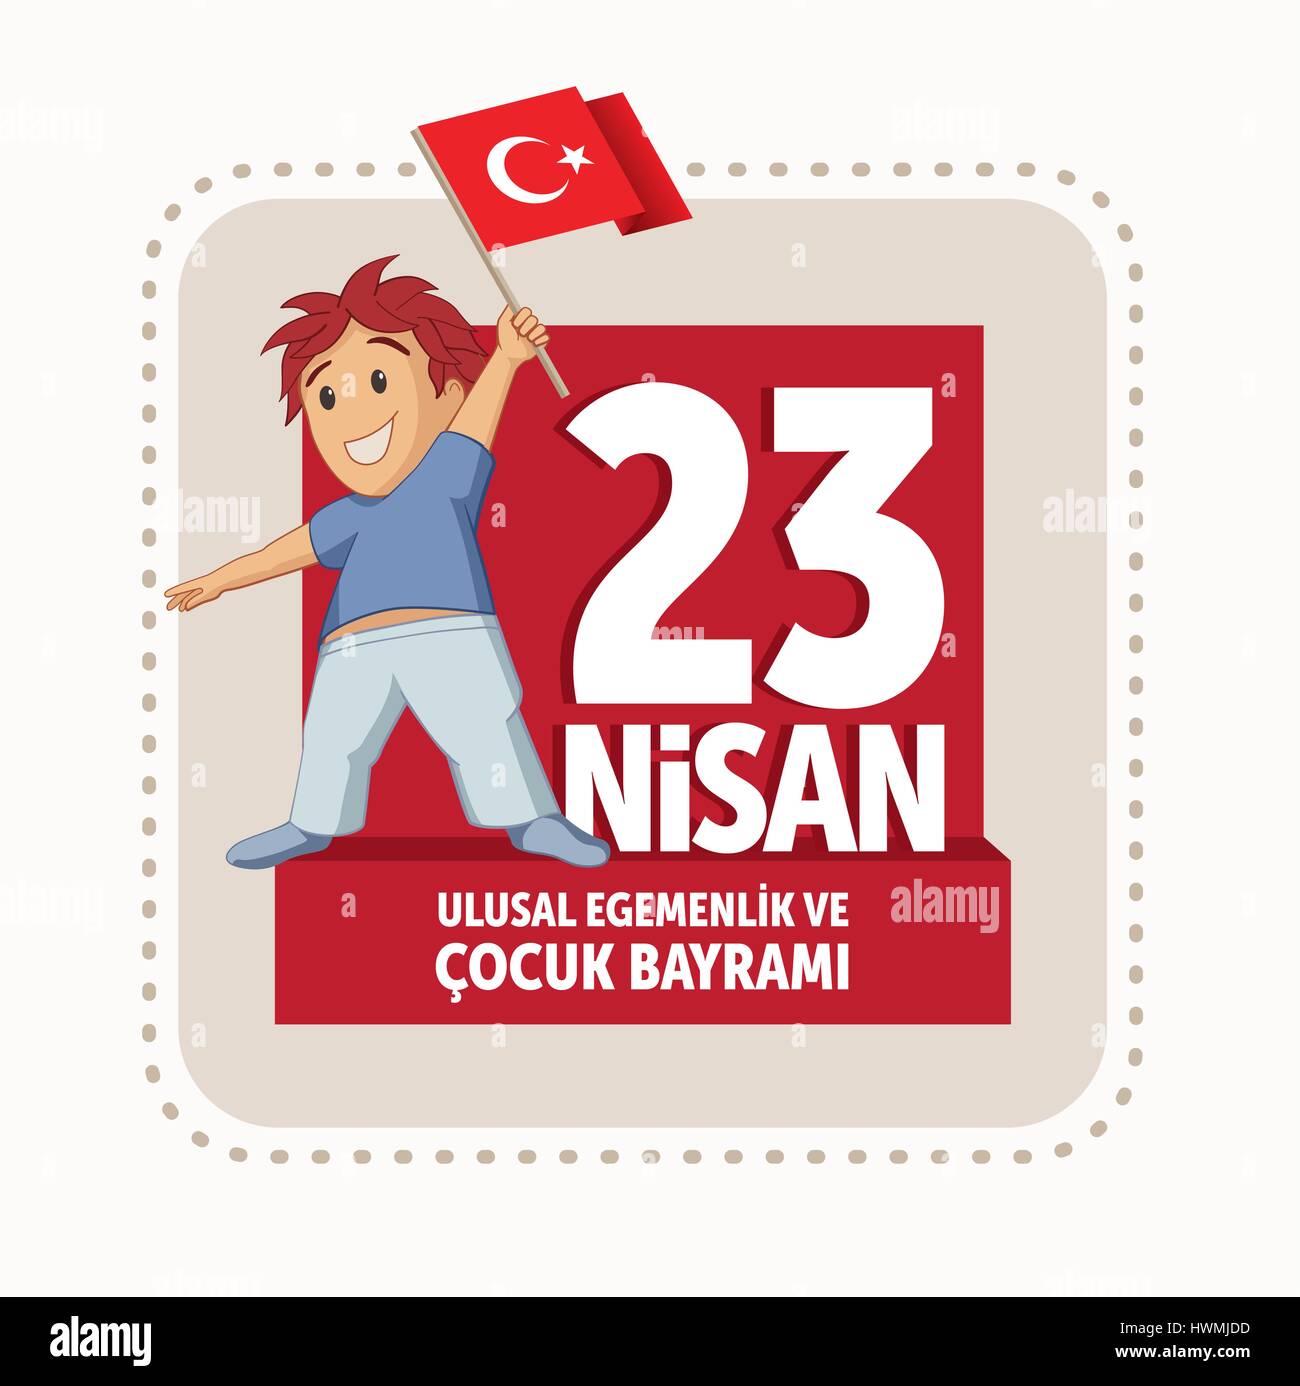 Vector illustration of the 23 Nisan Çocuk Bayrami, April 23 Turkish National Sovereignty and Children's Day, design template for the Turkish holiday. Stock Vector